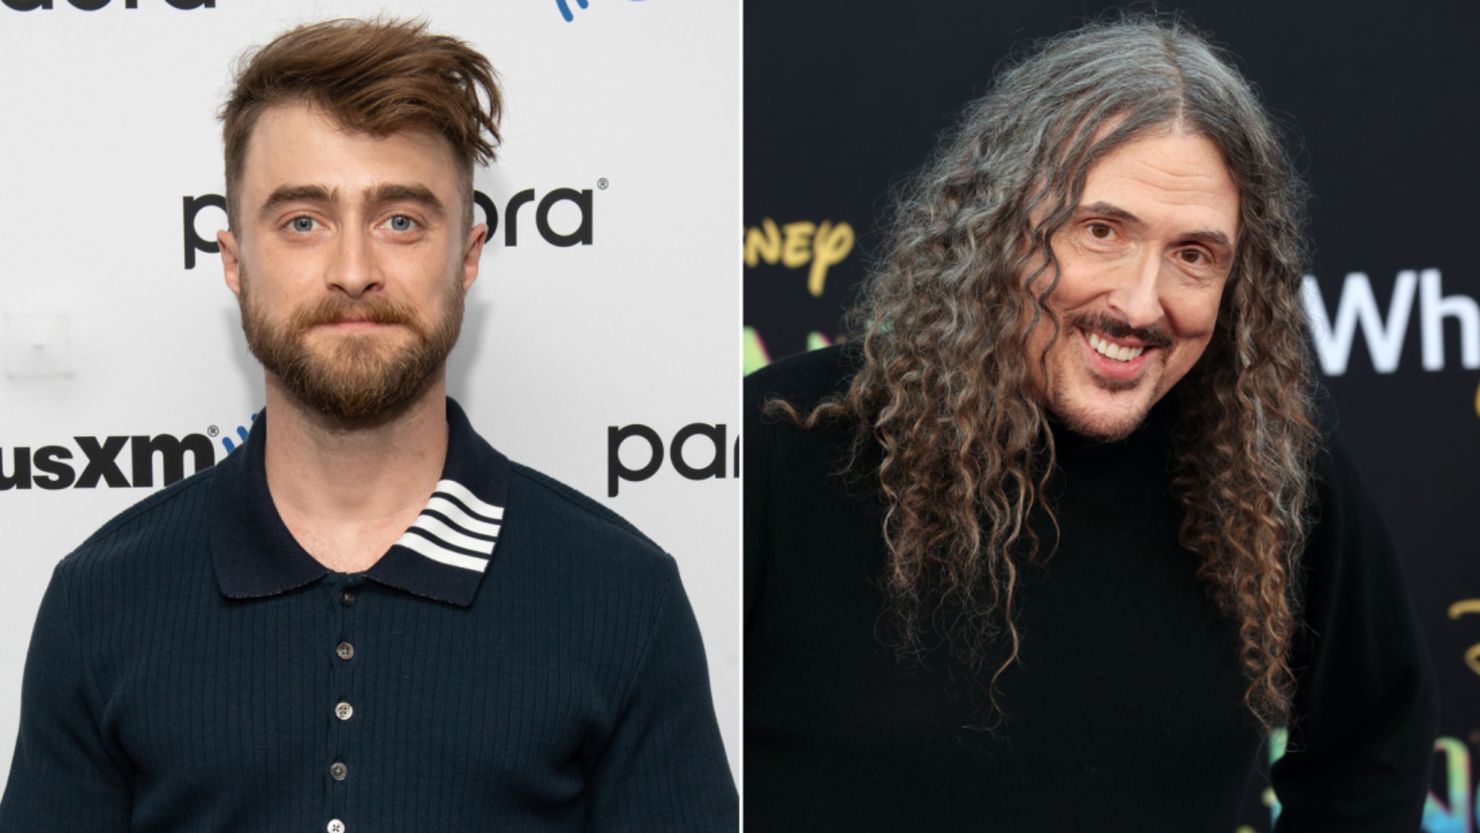 Daniel Radcliffe is going to work some magic in his next role -- playing 'Weird Al' Yankovic.